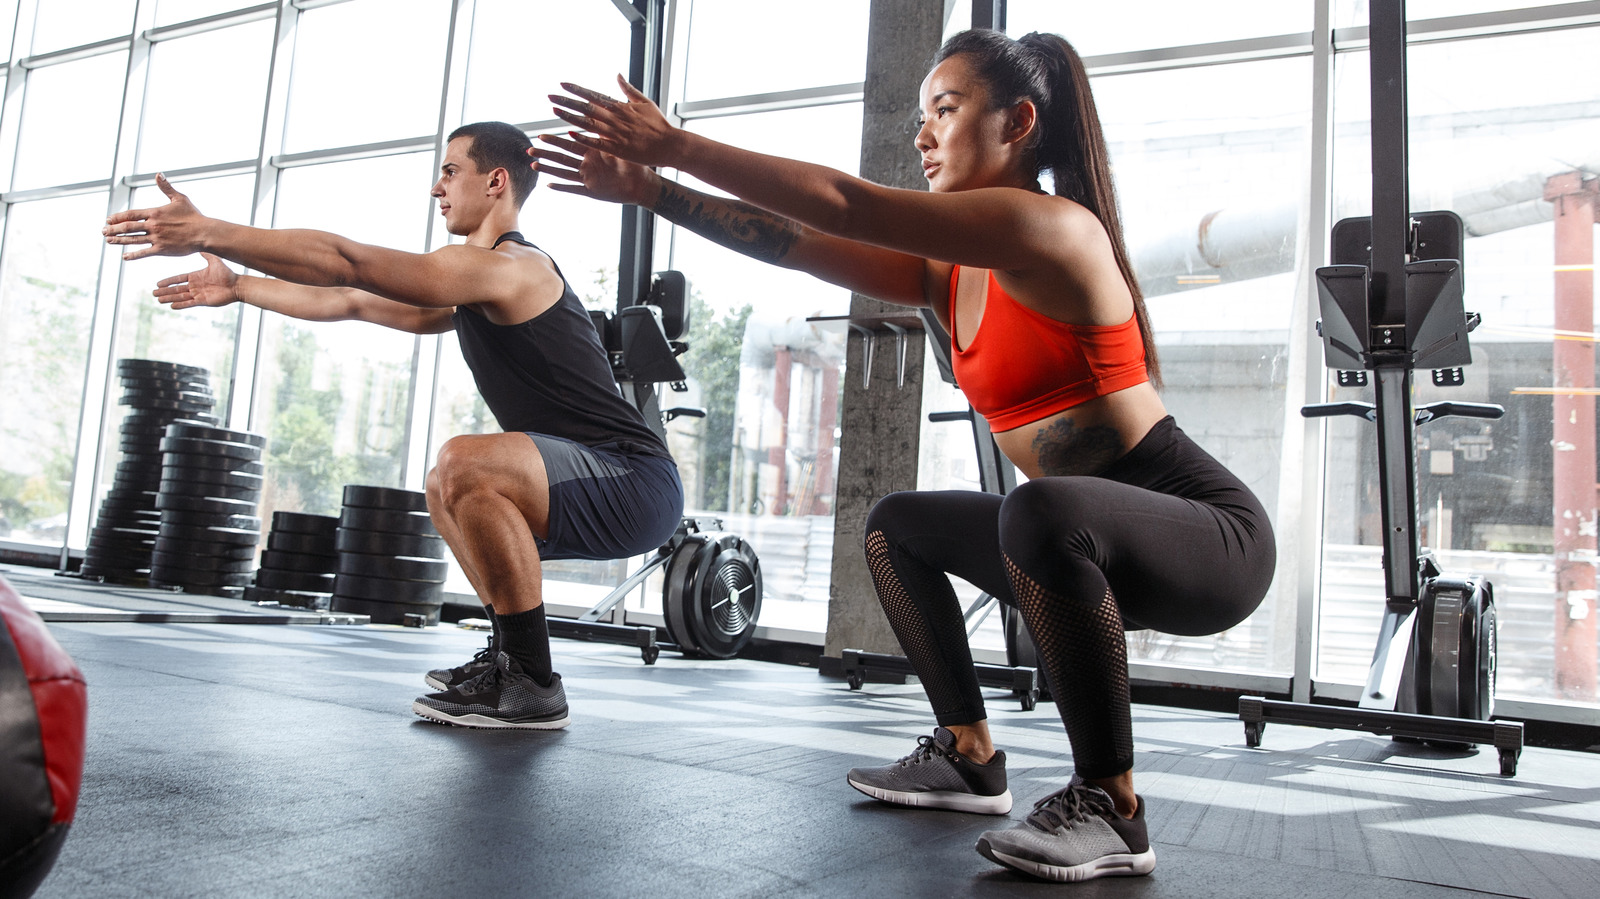 Do squats make your legs bigger or smaller? The fact is - squats work your  glutes, hamstrings, quadriceps and calves. But they will also make your  legs